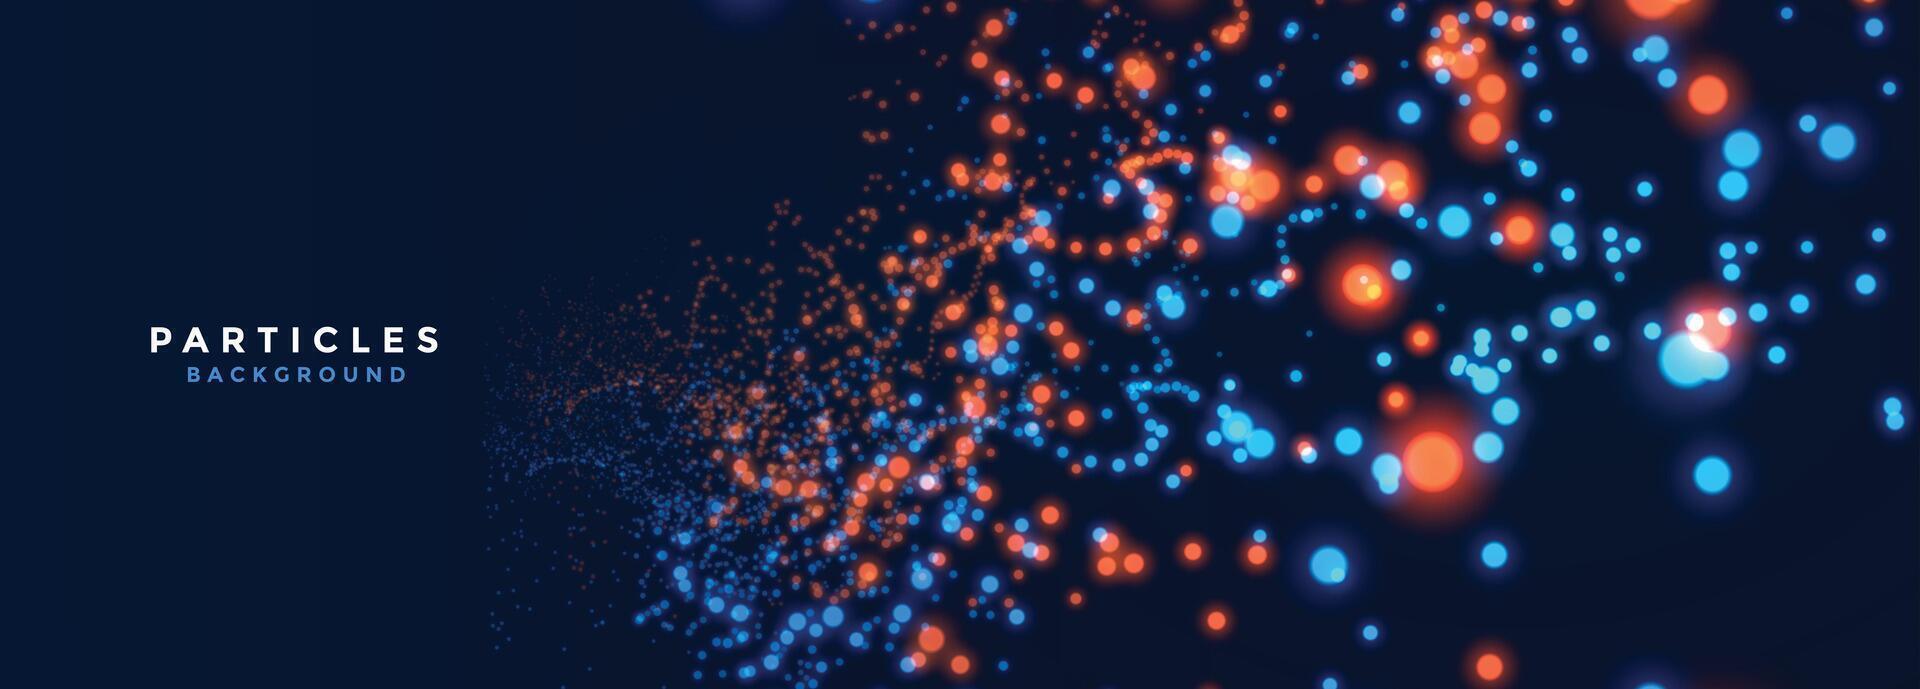 shiny and abstract technology particle wallpaper for visualization vector